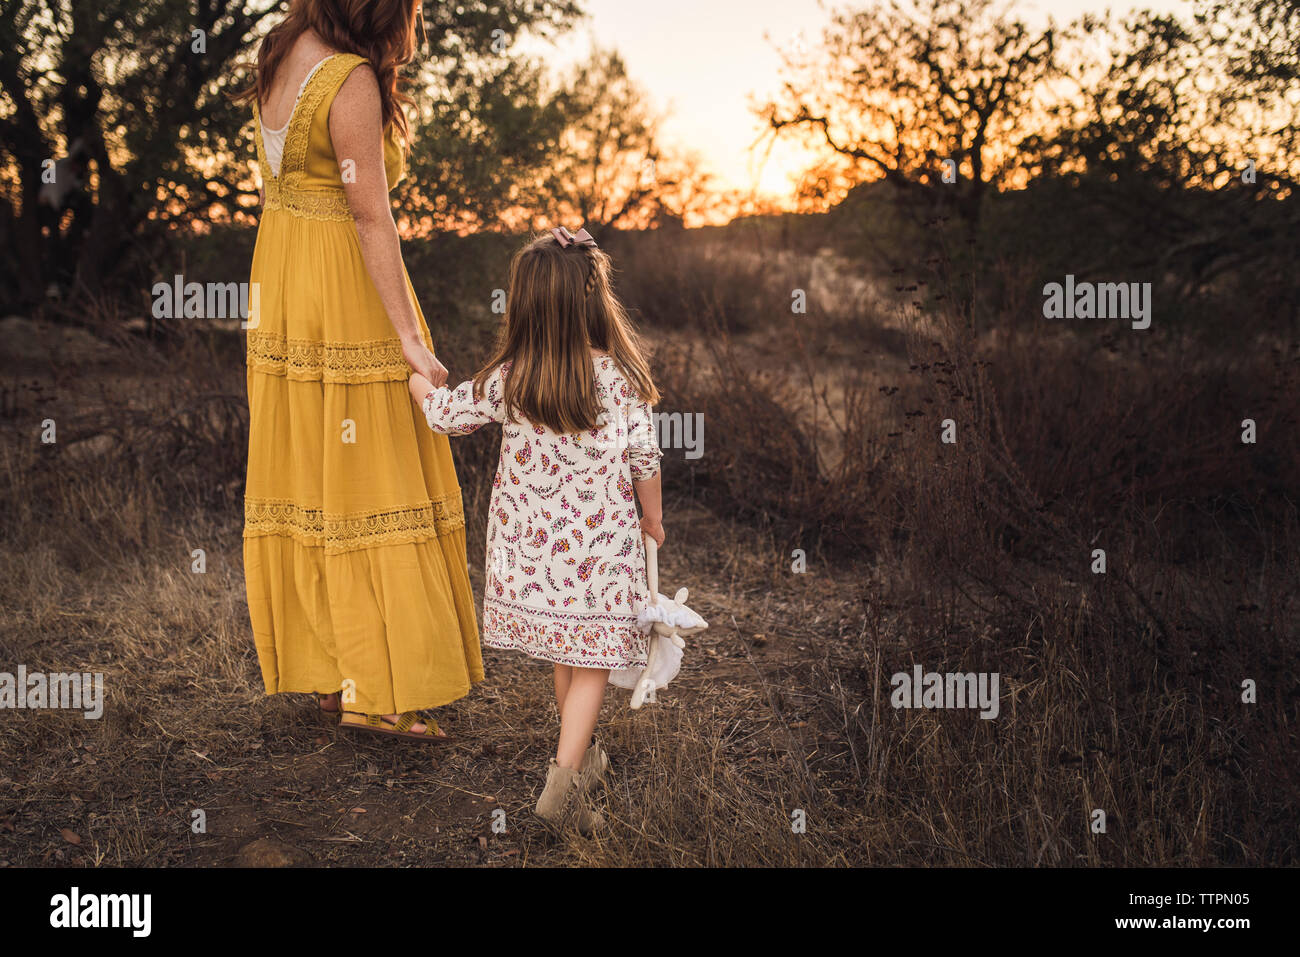 Young girl holding mothers hand while walking away in California field Stock Photo